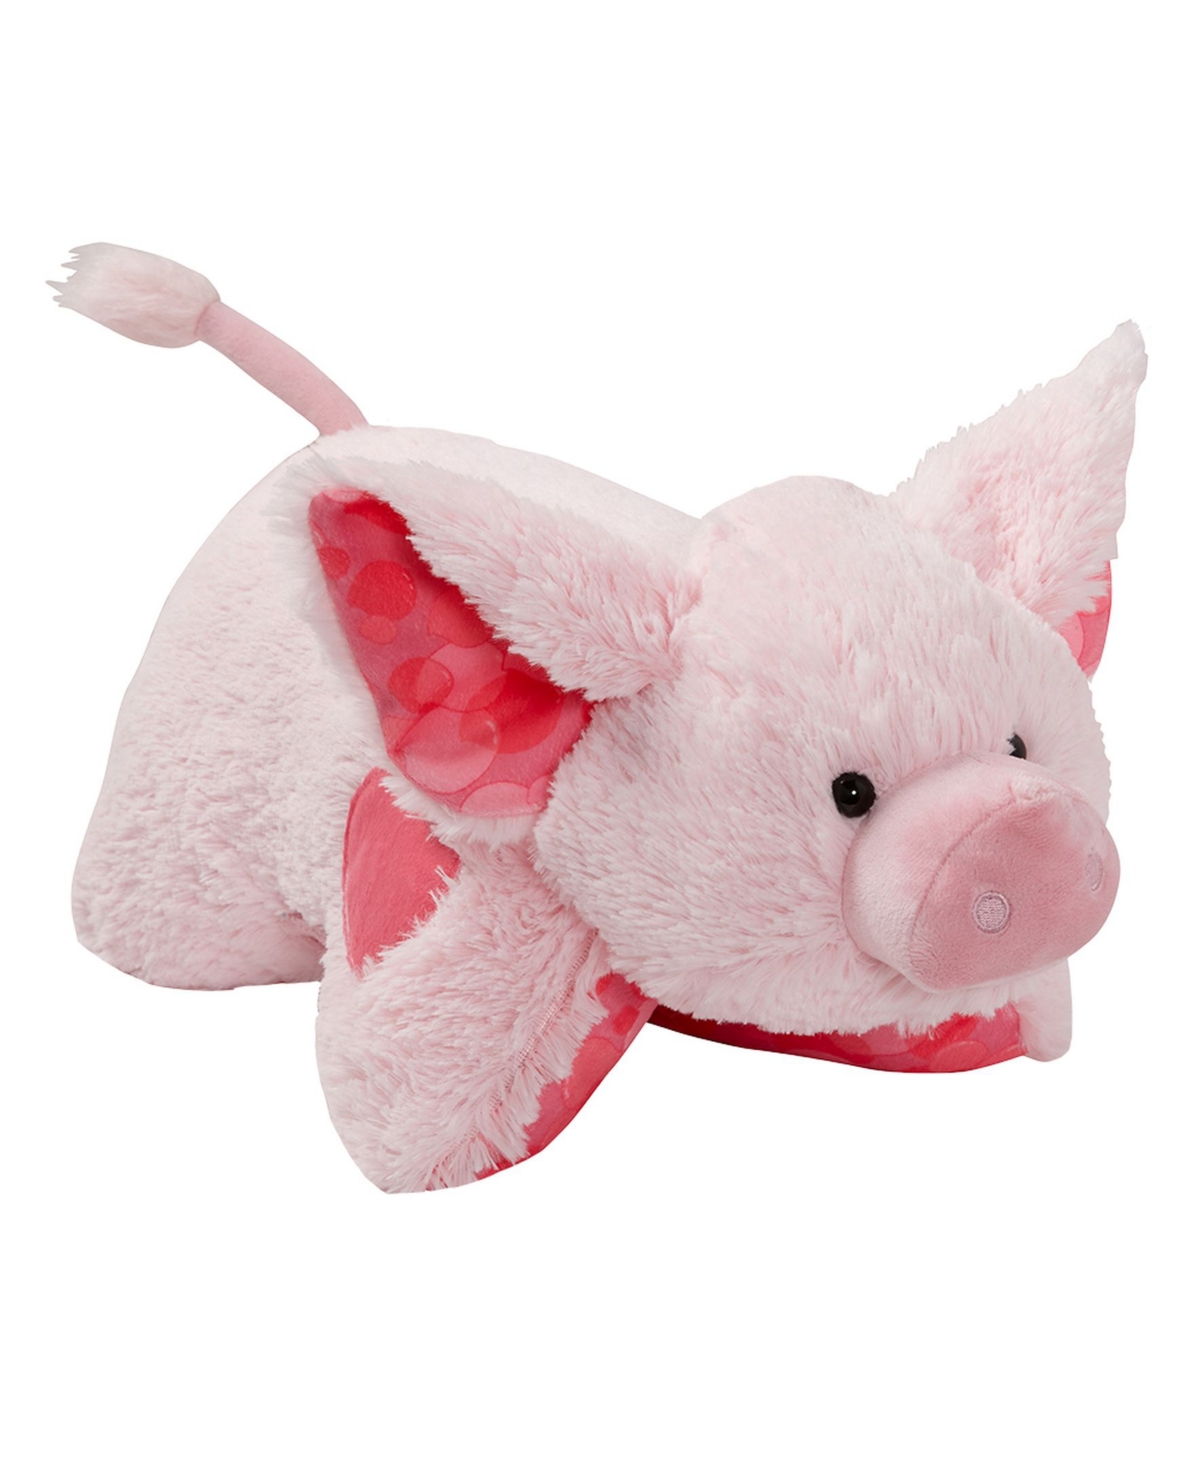 Pillow Pets Kids' Sweet Scented Bubble Gum Pig Stuffed Animal Plush Toy In Pink